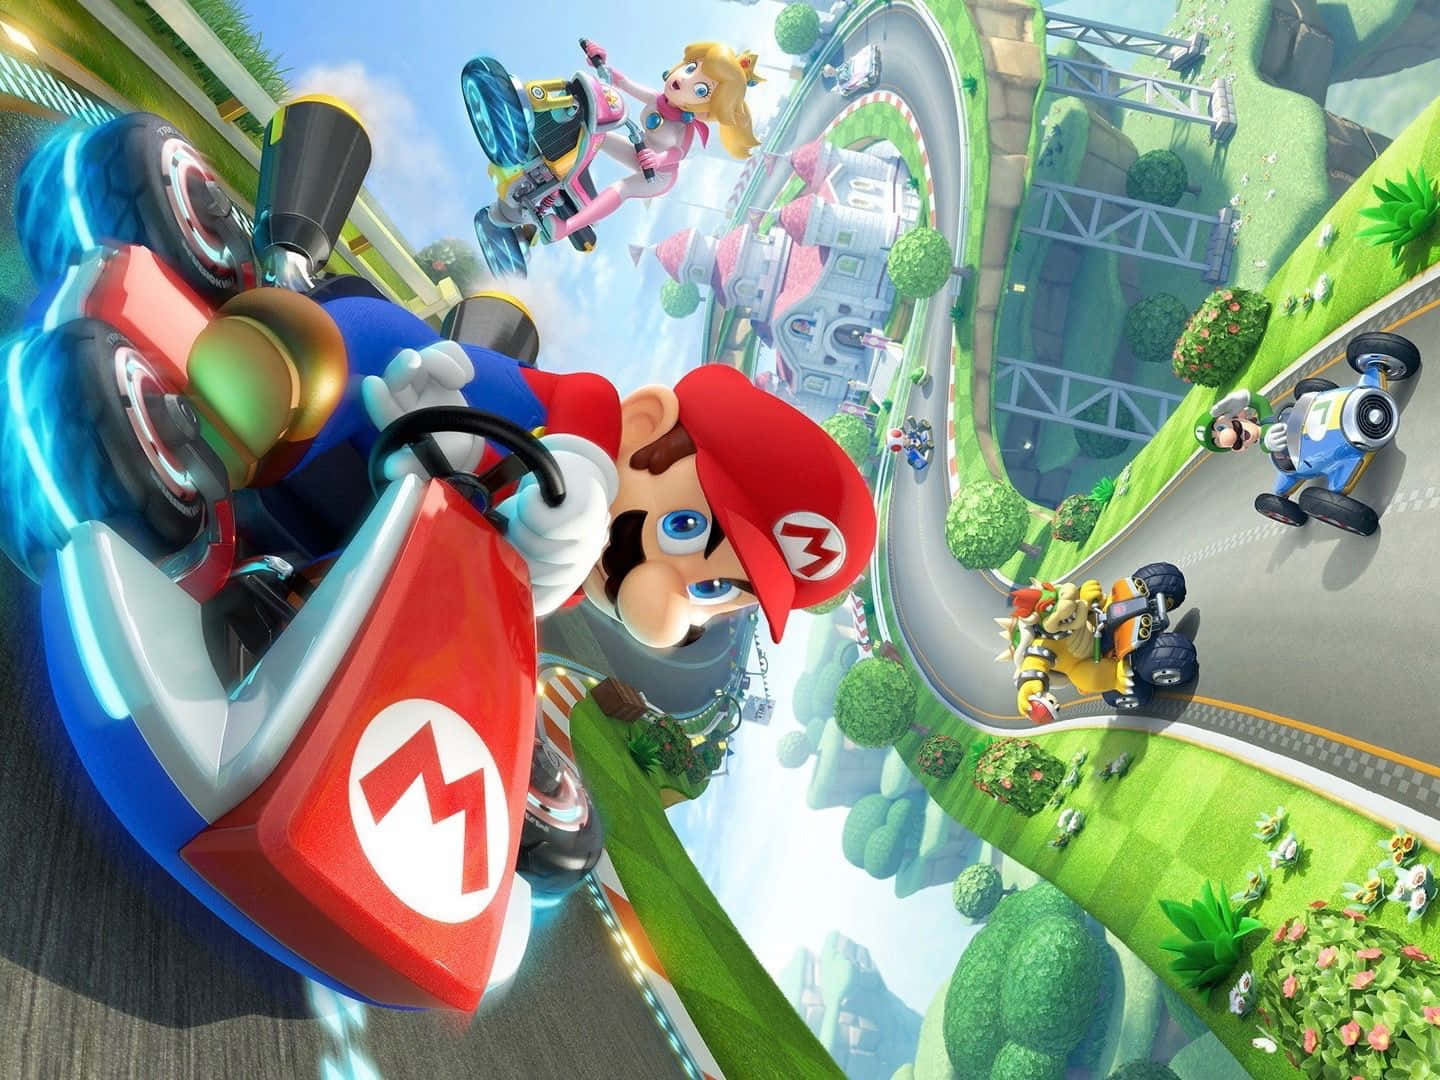 Exciting Mario Kart 8 Deluxe Race With Friends Wallpaper